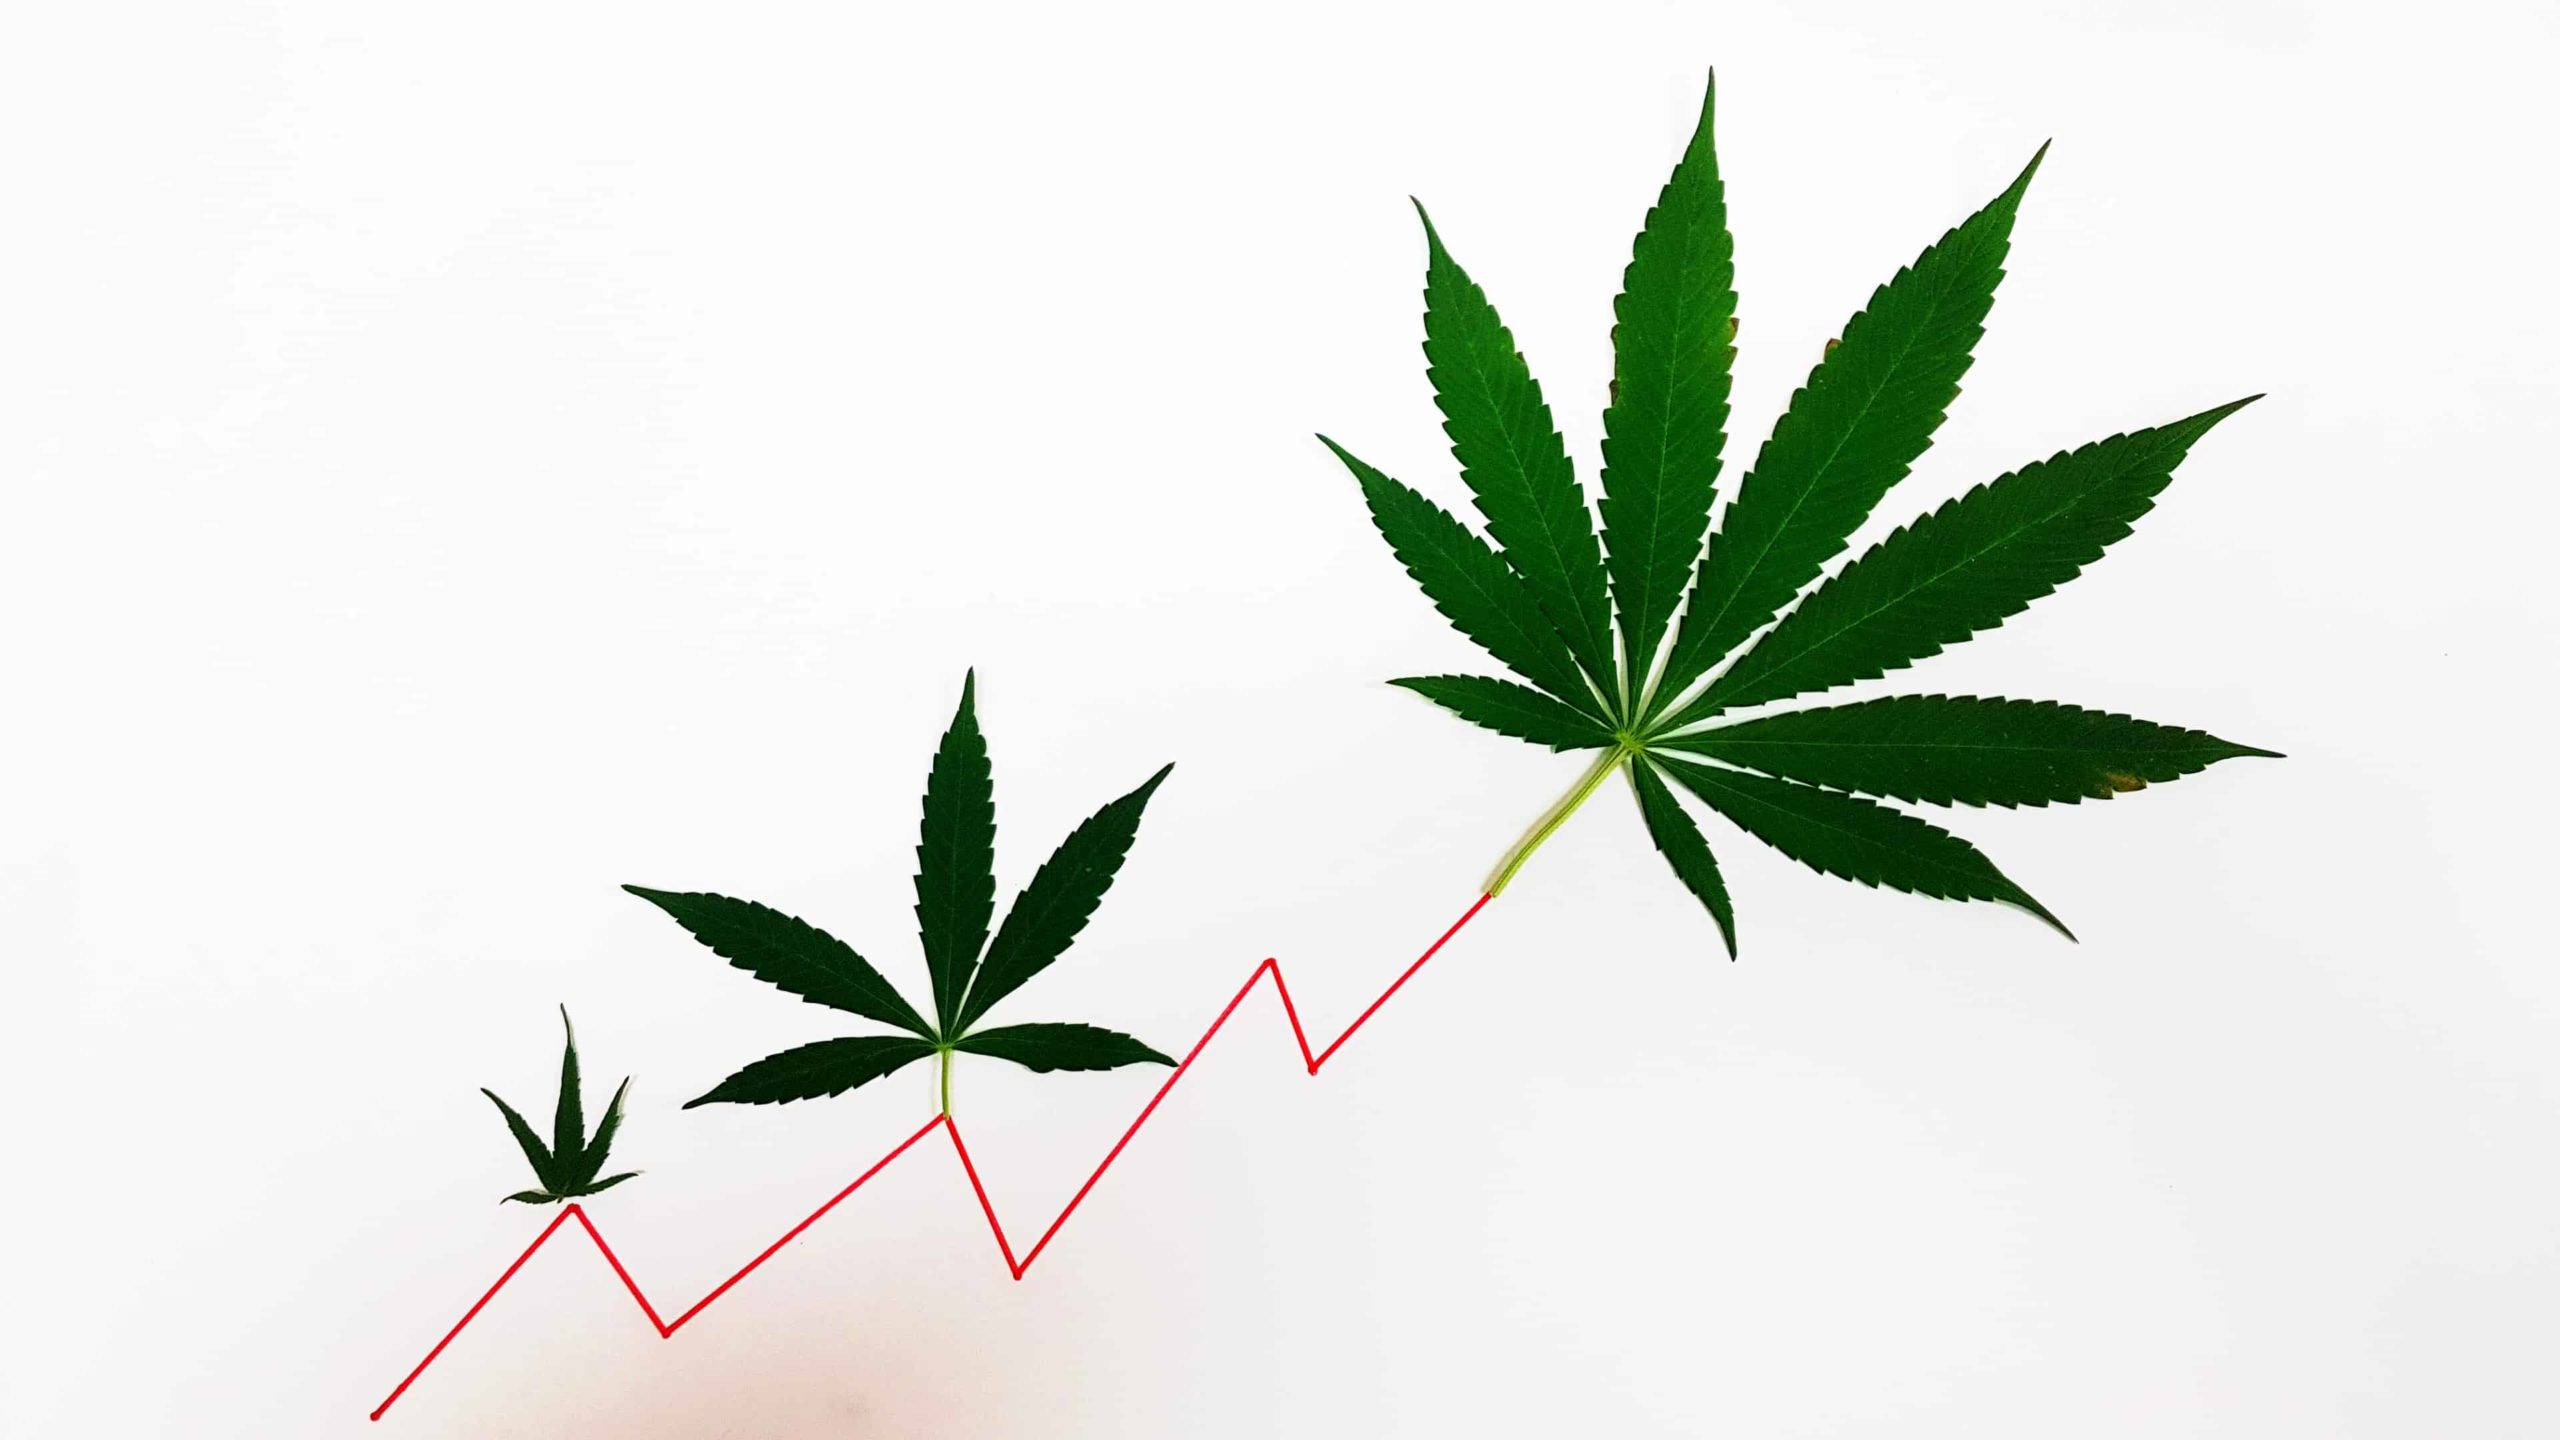 cannabis leaves on a rising line graph representing growth of ASX cannabis share price